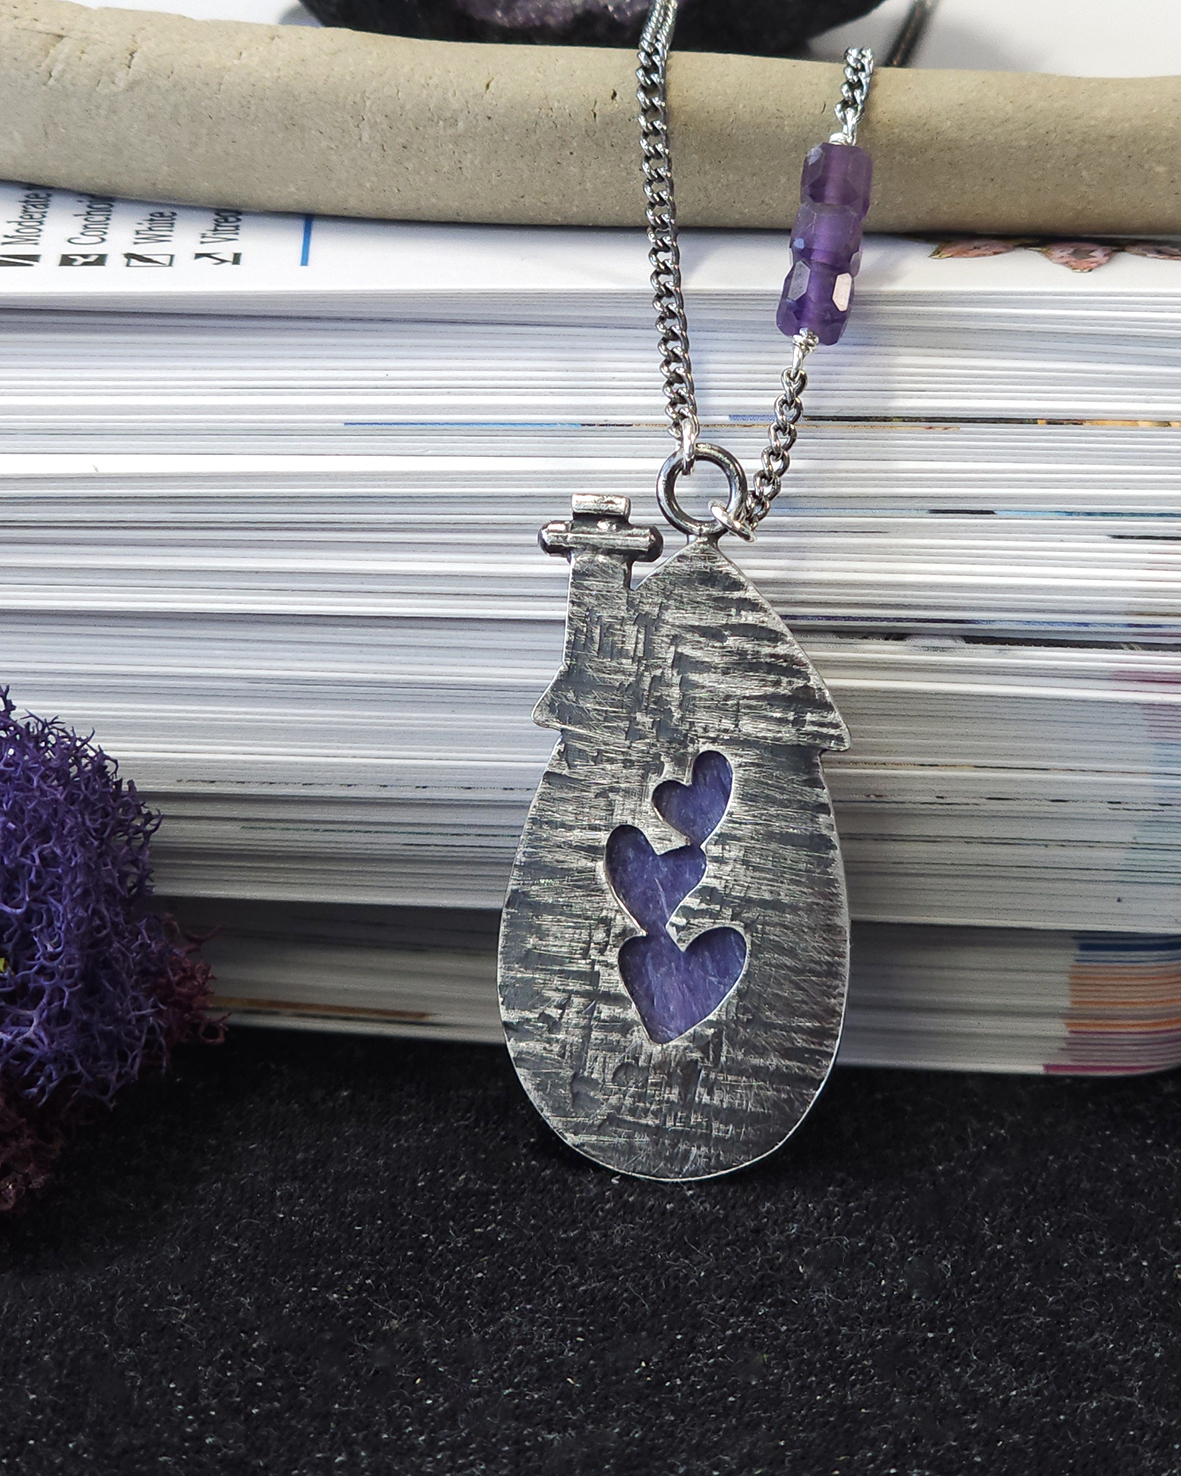 potion of positivity pendant necklace with charoite gemstone